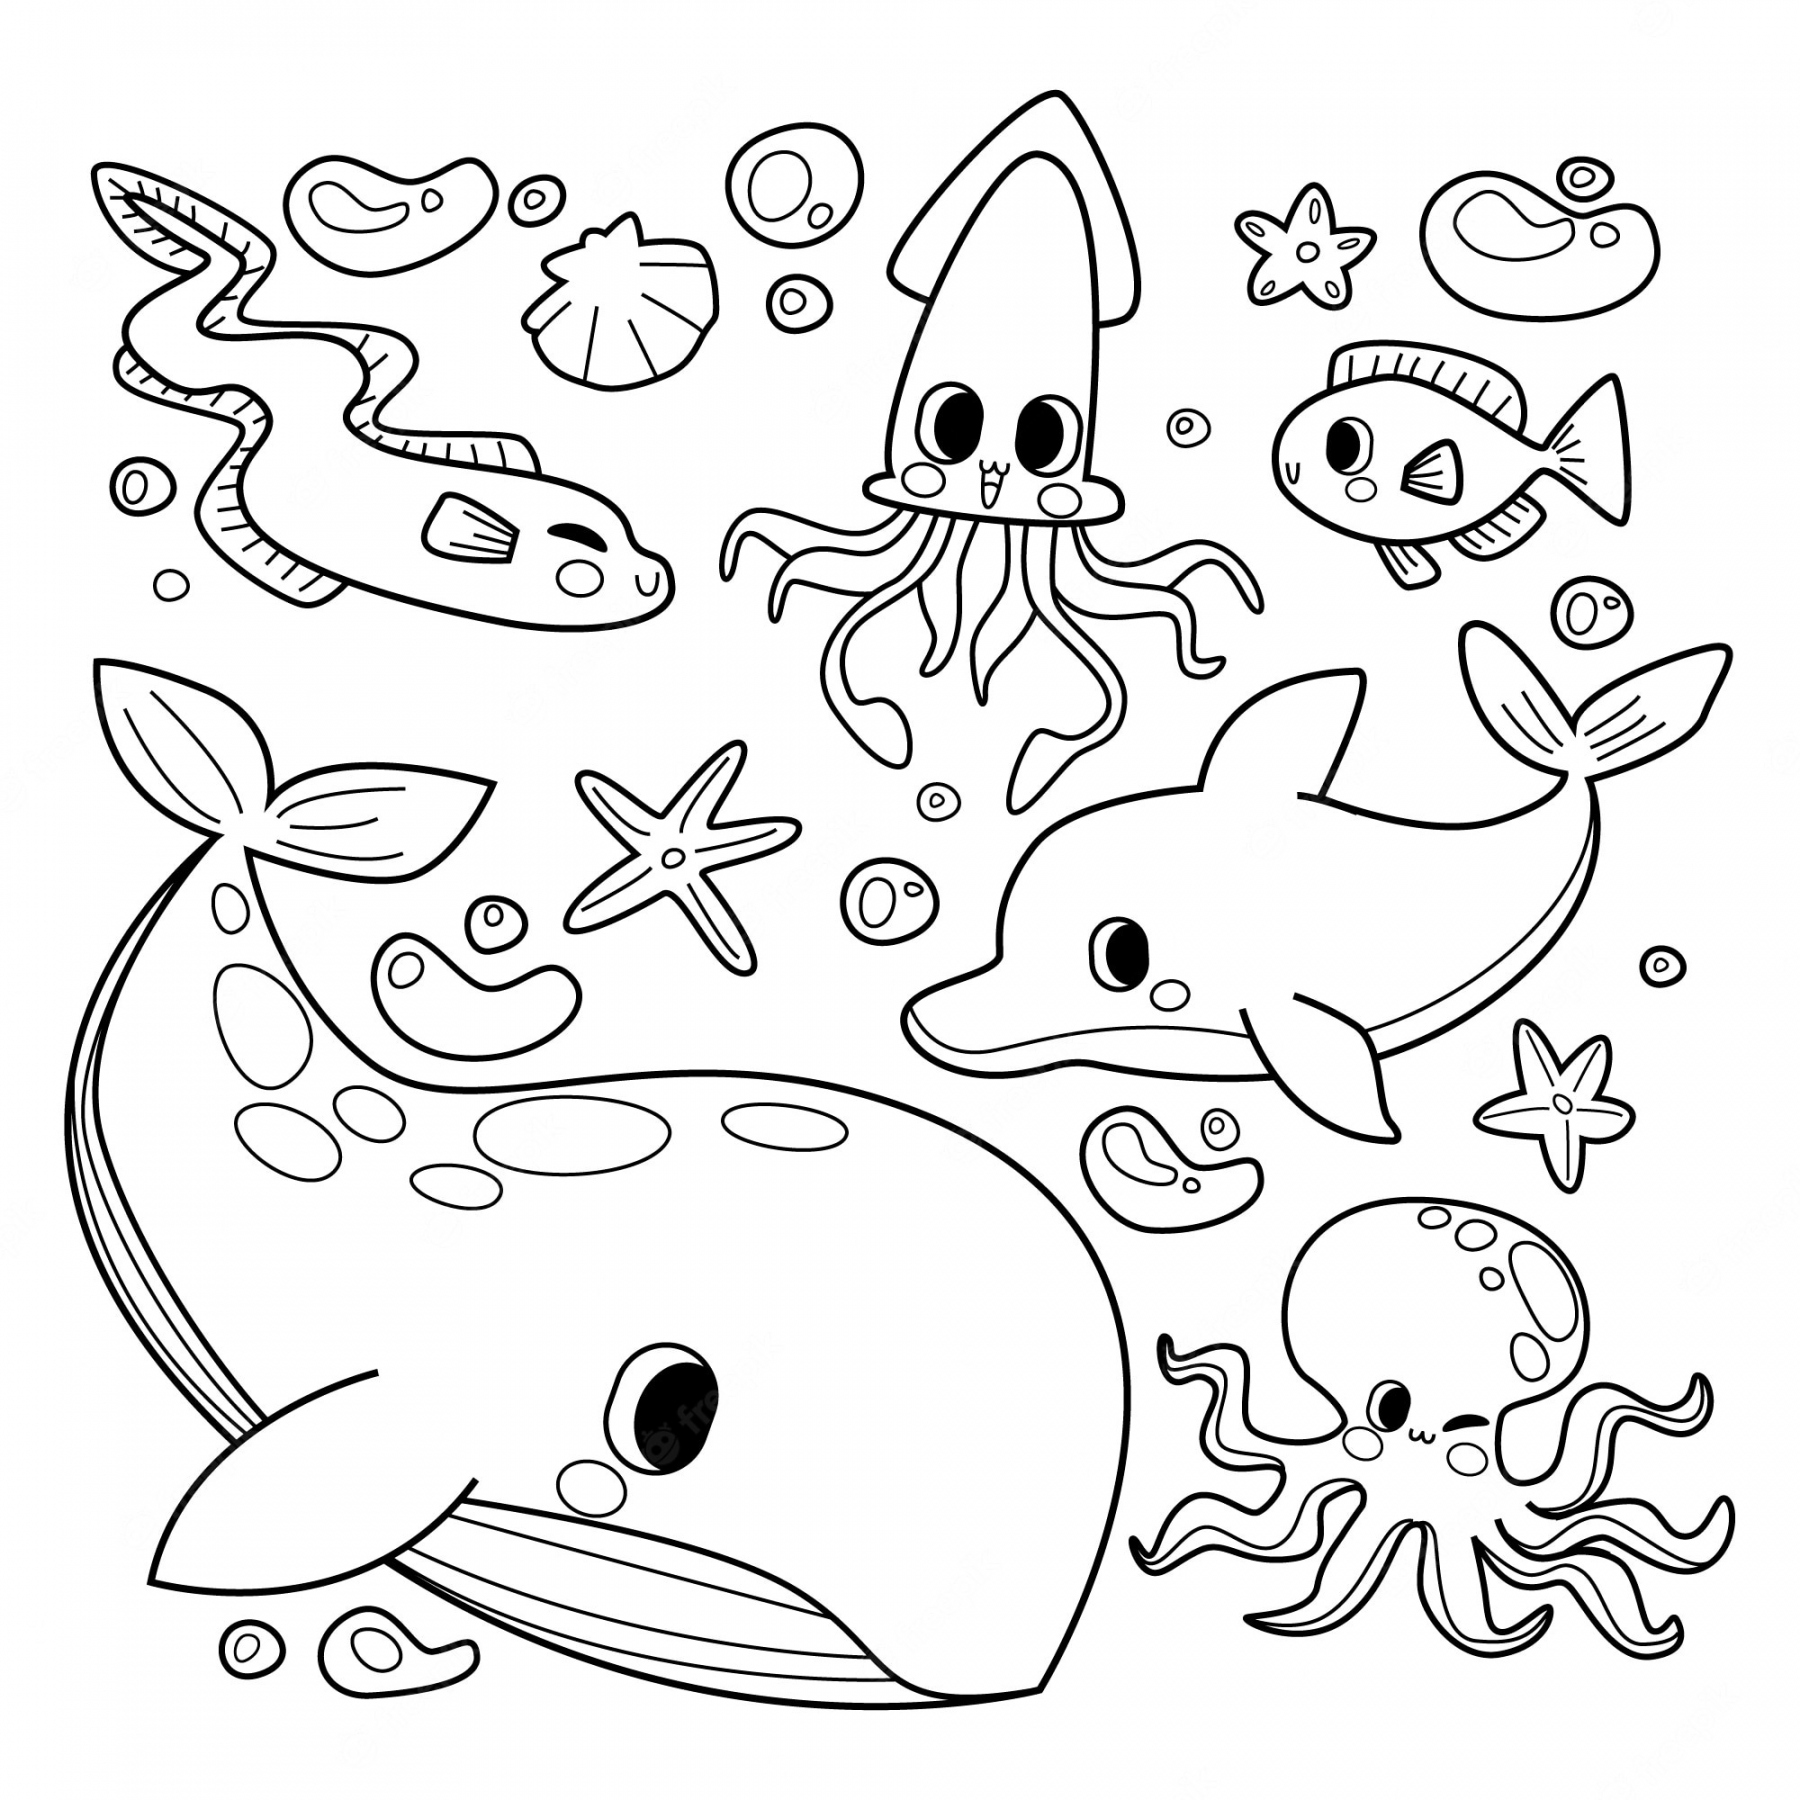 Free Printable Pages For Coloring - Printable - Coloring Pages Images - Free Download on Freepik